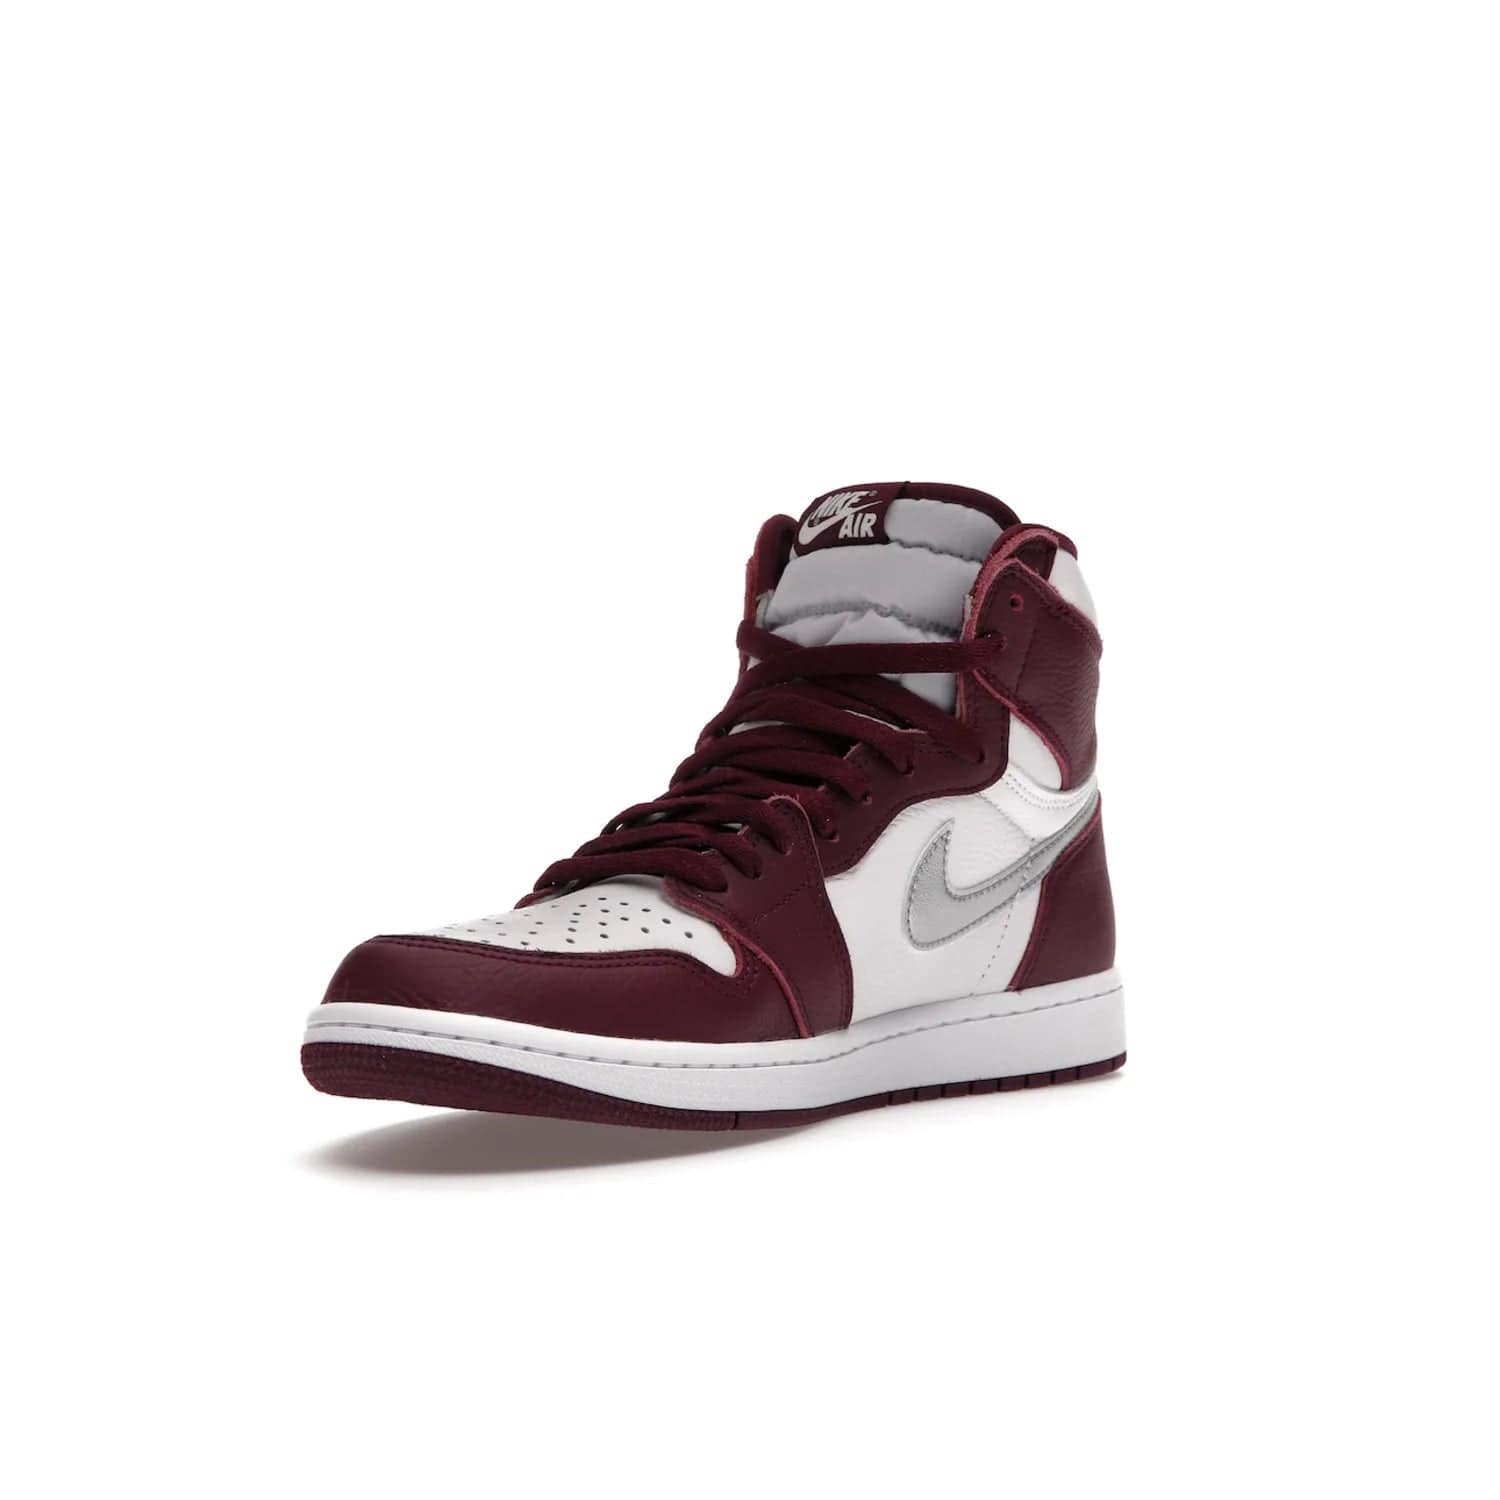 Jordan 1 Retro High OG Bordeaux - Image 14 - Only at www.BallersClubKickz.com - Shop the classic Air Jordan 1 High Bordeaux with a modern high-top cut. The timeless Bordeaux and White-Metallic Silver colorway, releasing Nov 20, 2021, is perfect for practice or a night out.